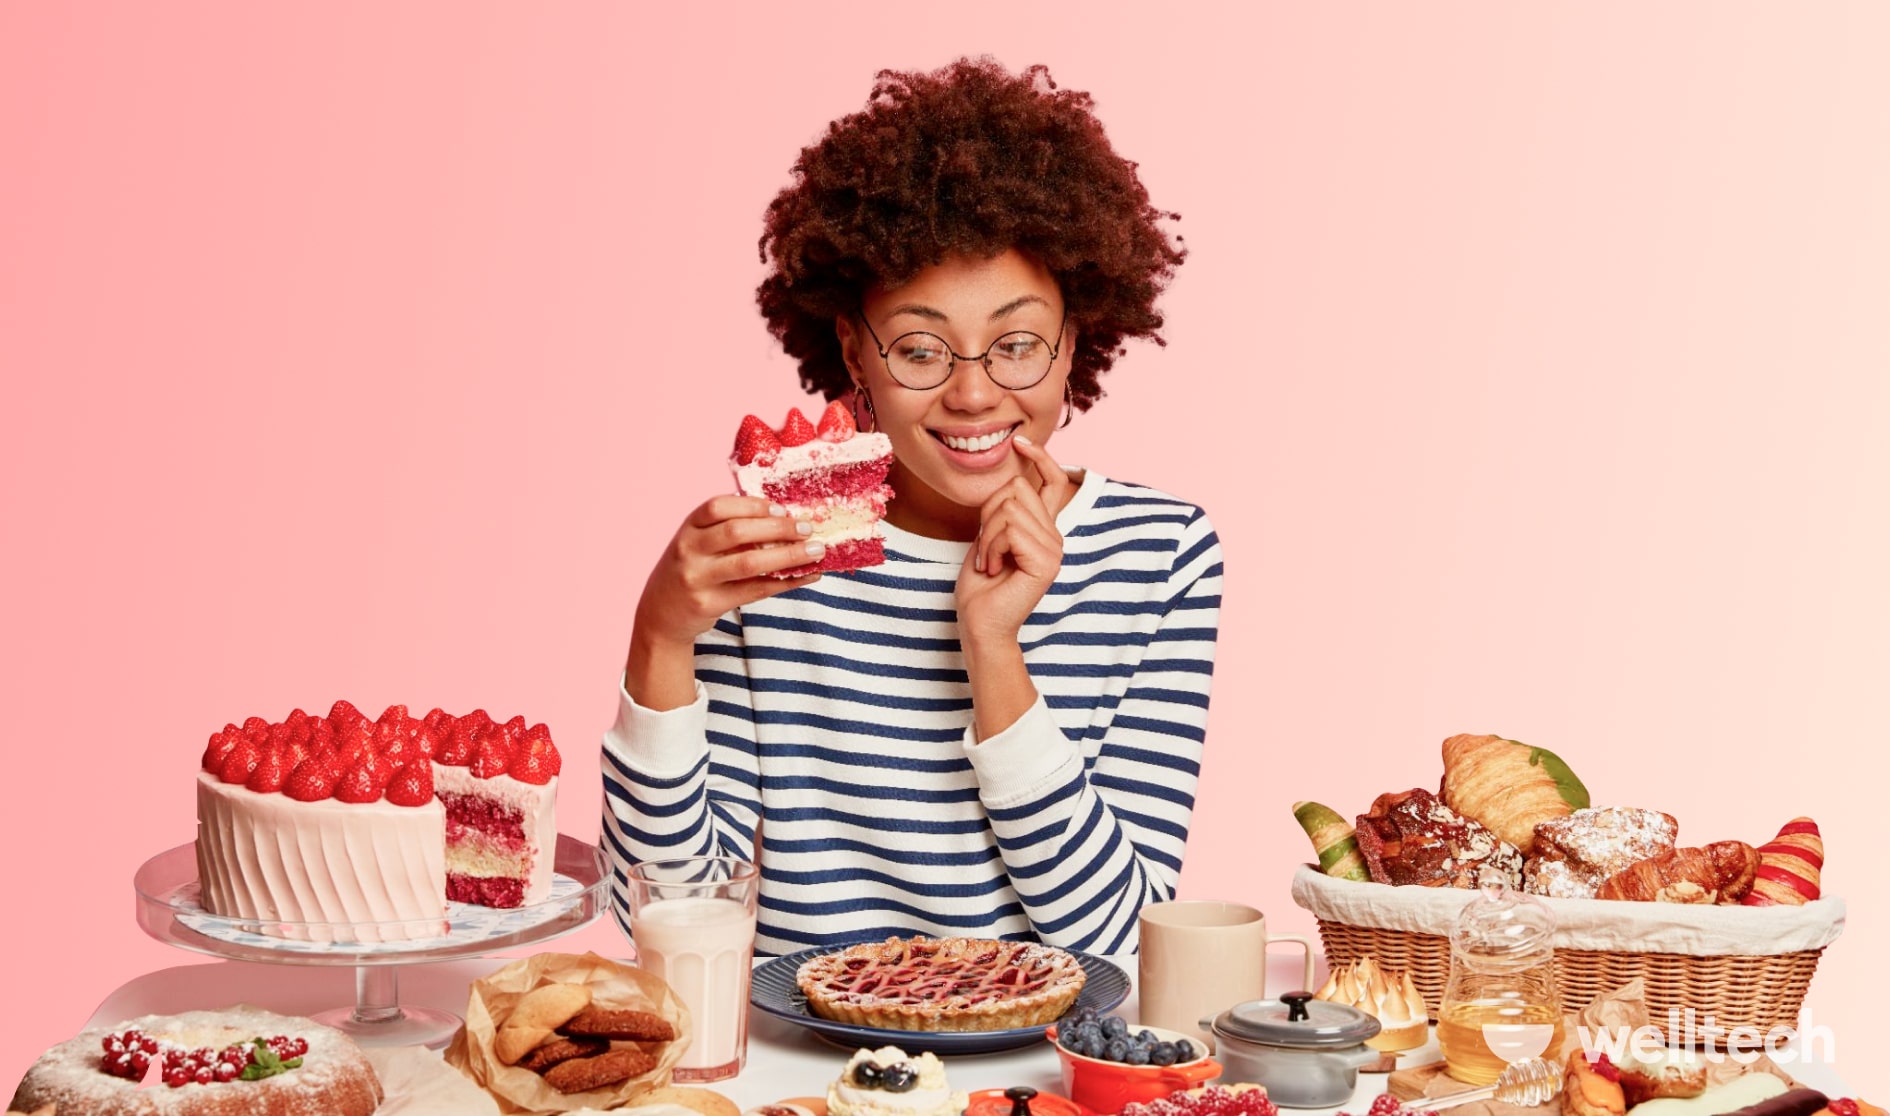 a girl with curly hair is eating a dessert with a lot of food in front of her, cheat weekend